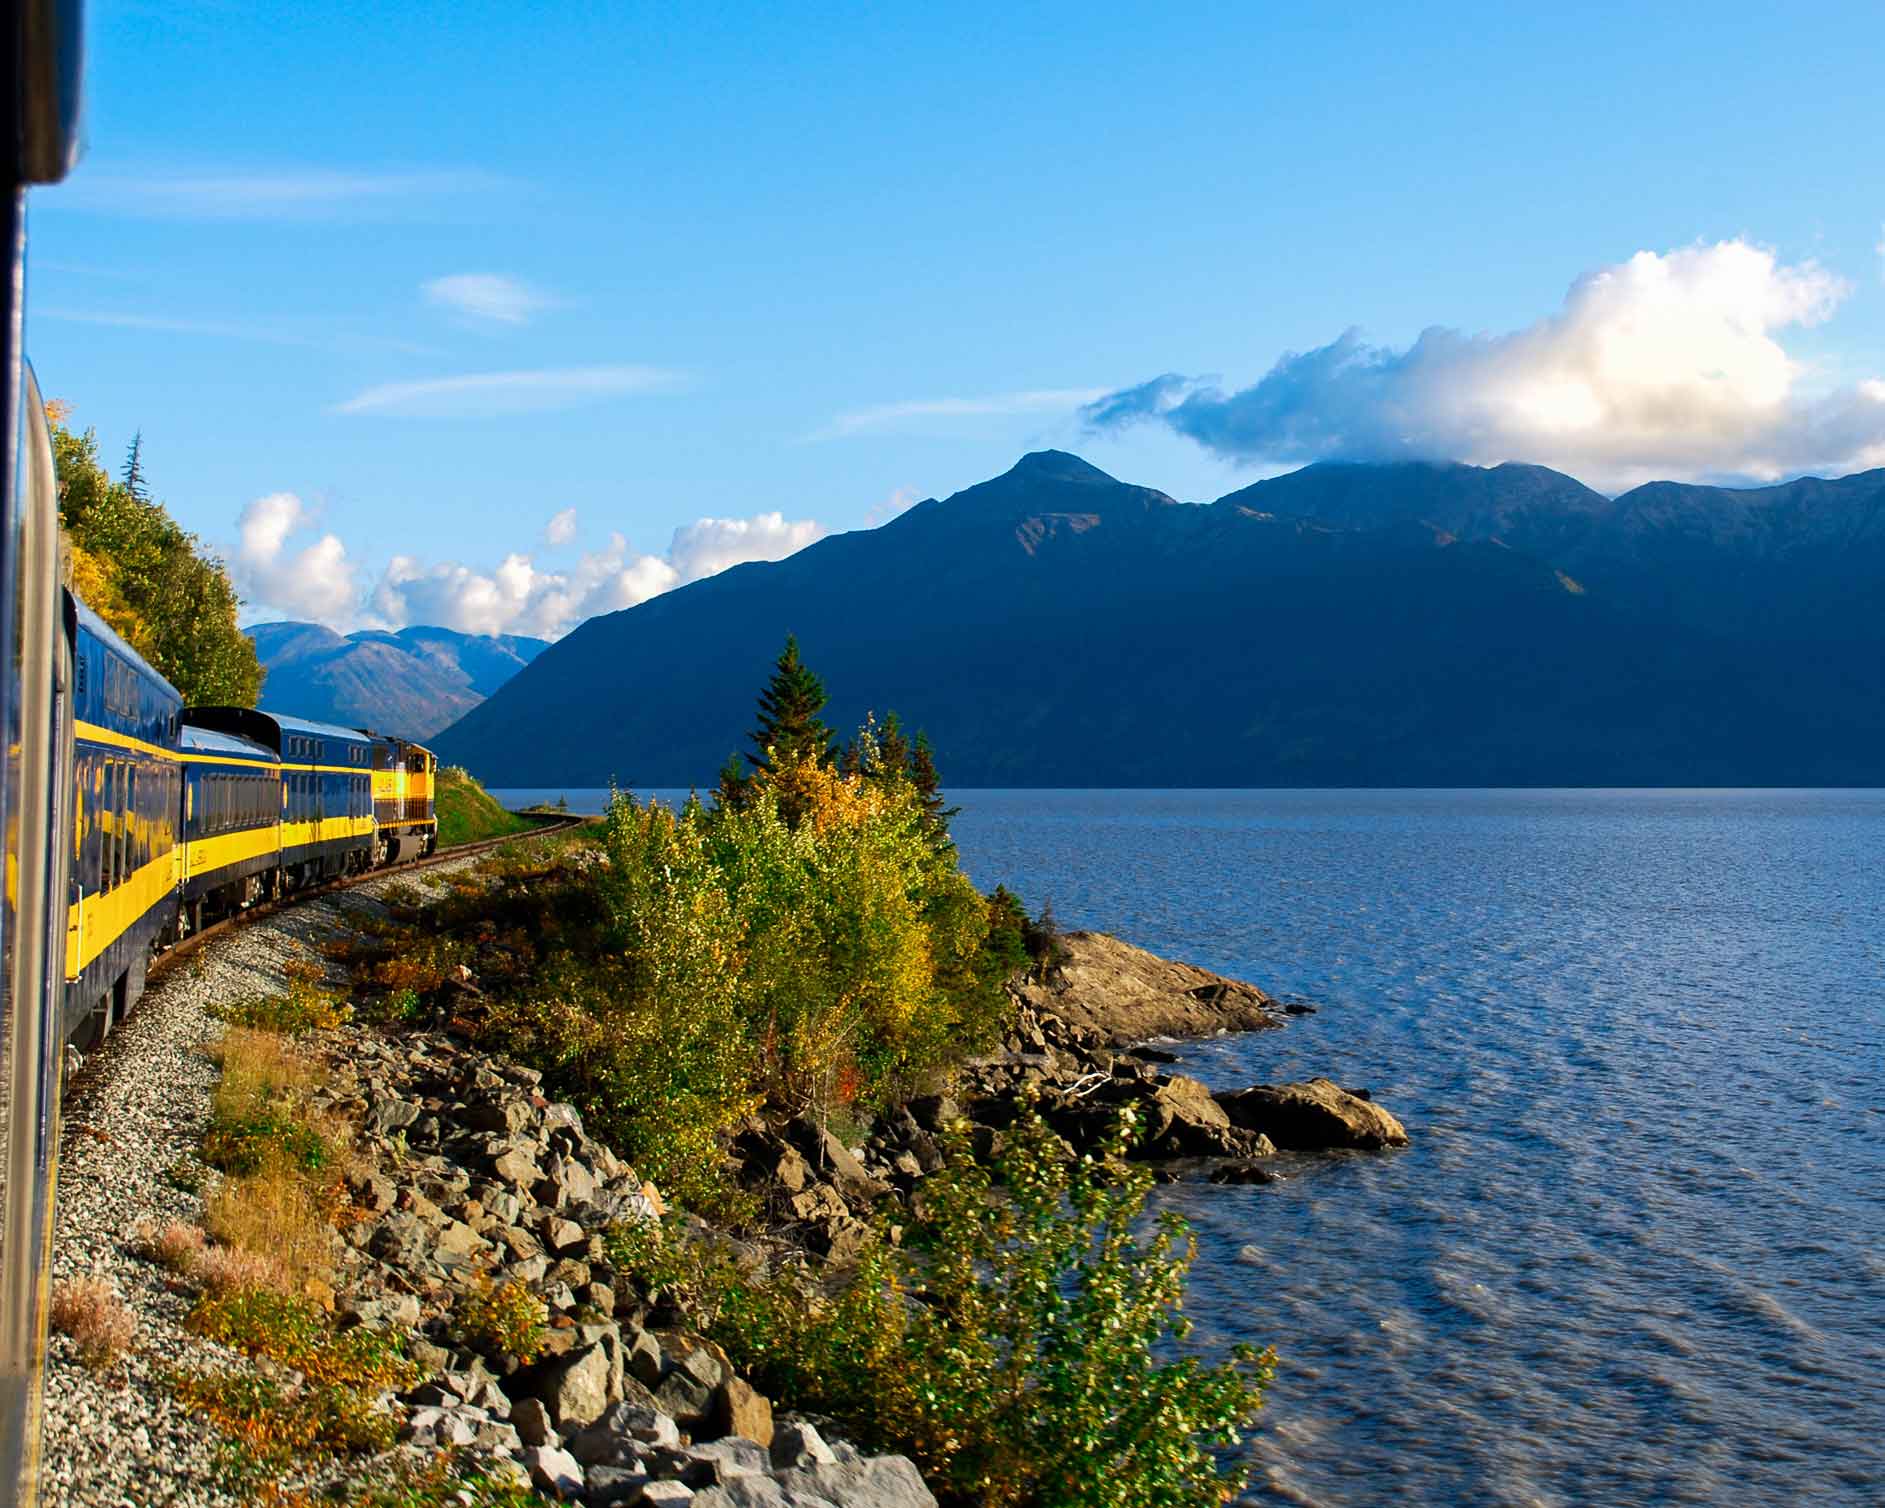 High-end train travel: Alaskan train going past lakes and mountains.